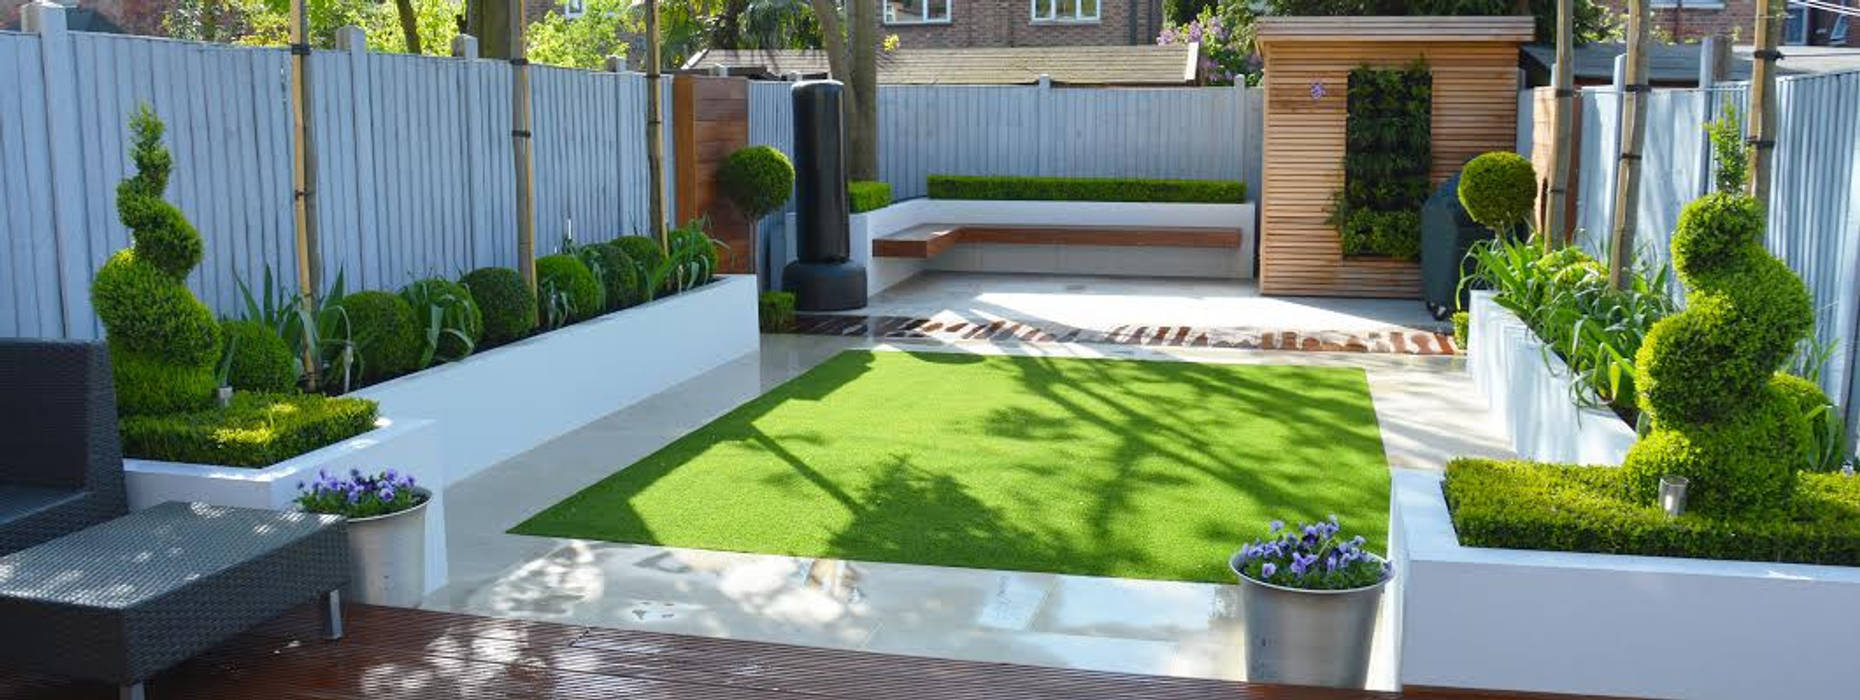 Minimalist Garden: Amazing relaxing space that you will fall in love with, Landscaper in London Landscaper in London Taman Modern